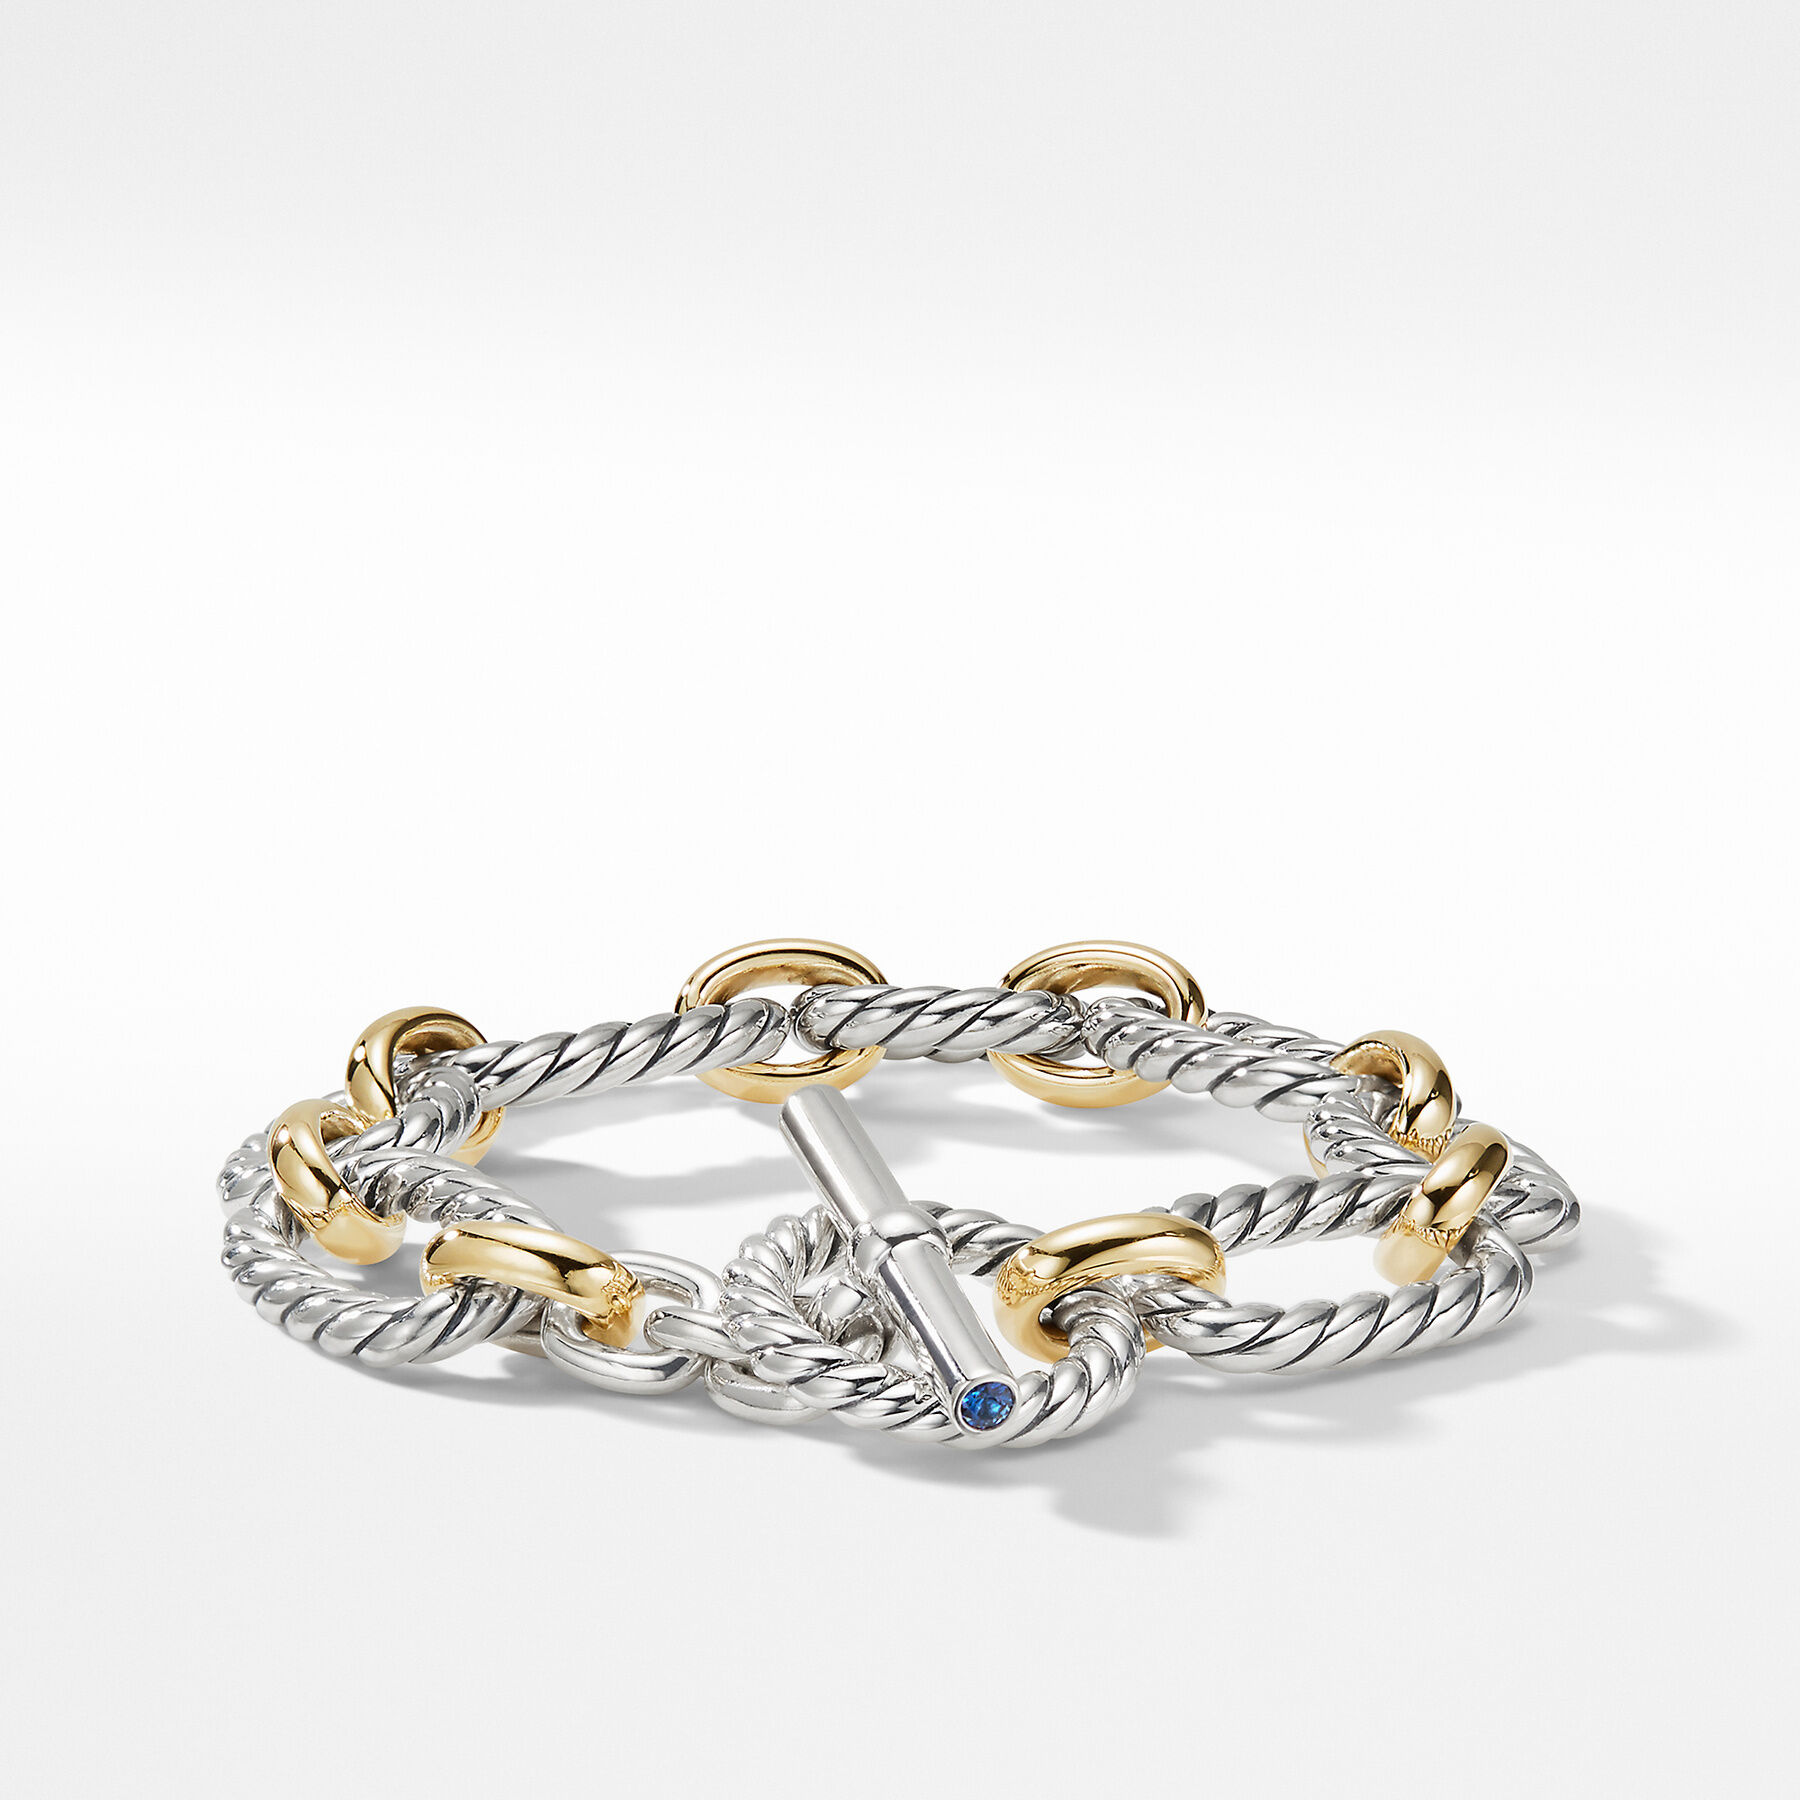 Cushion Link Bracelet with Blue Sapphires and 18K Gold